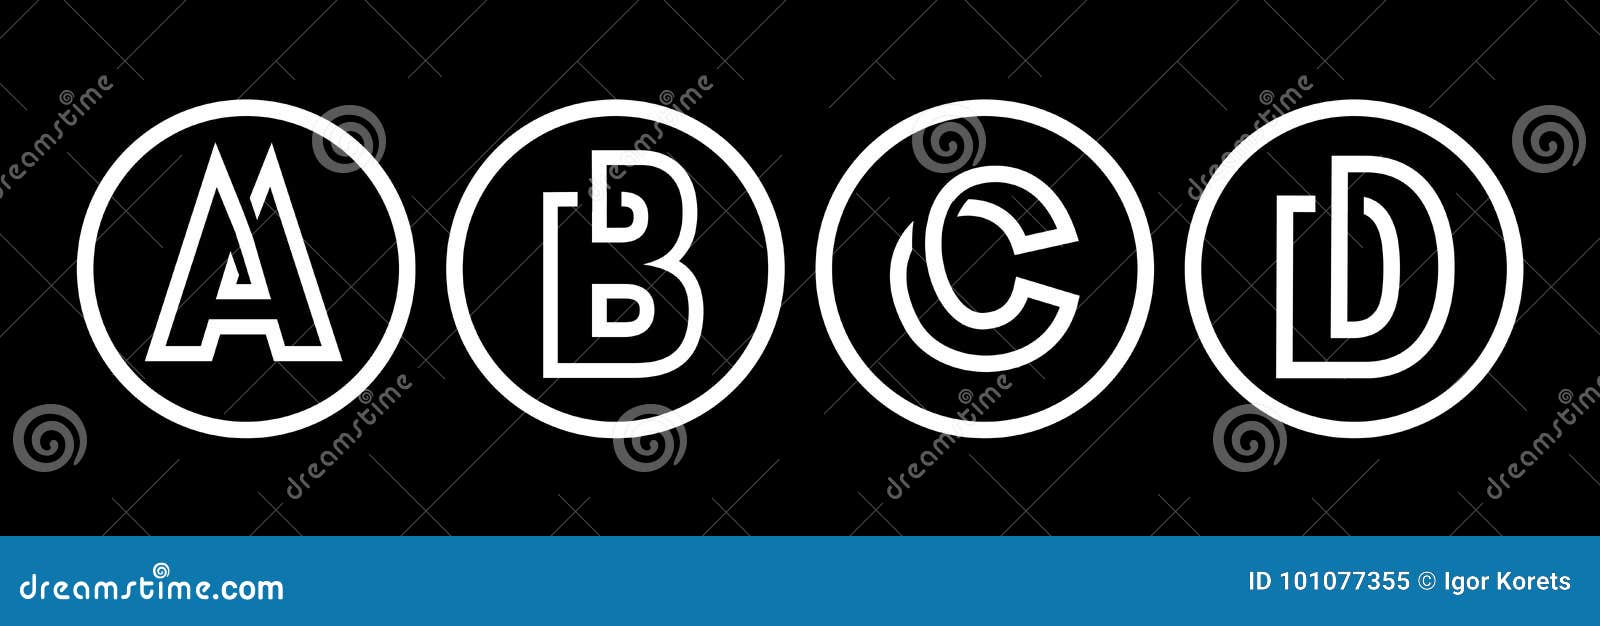 Abcd logo design Stock Vector Images - Alamy